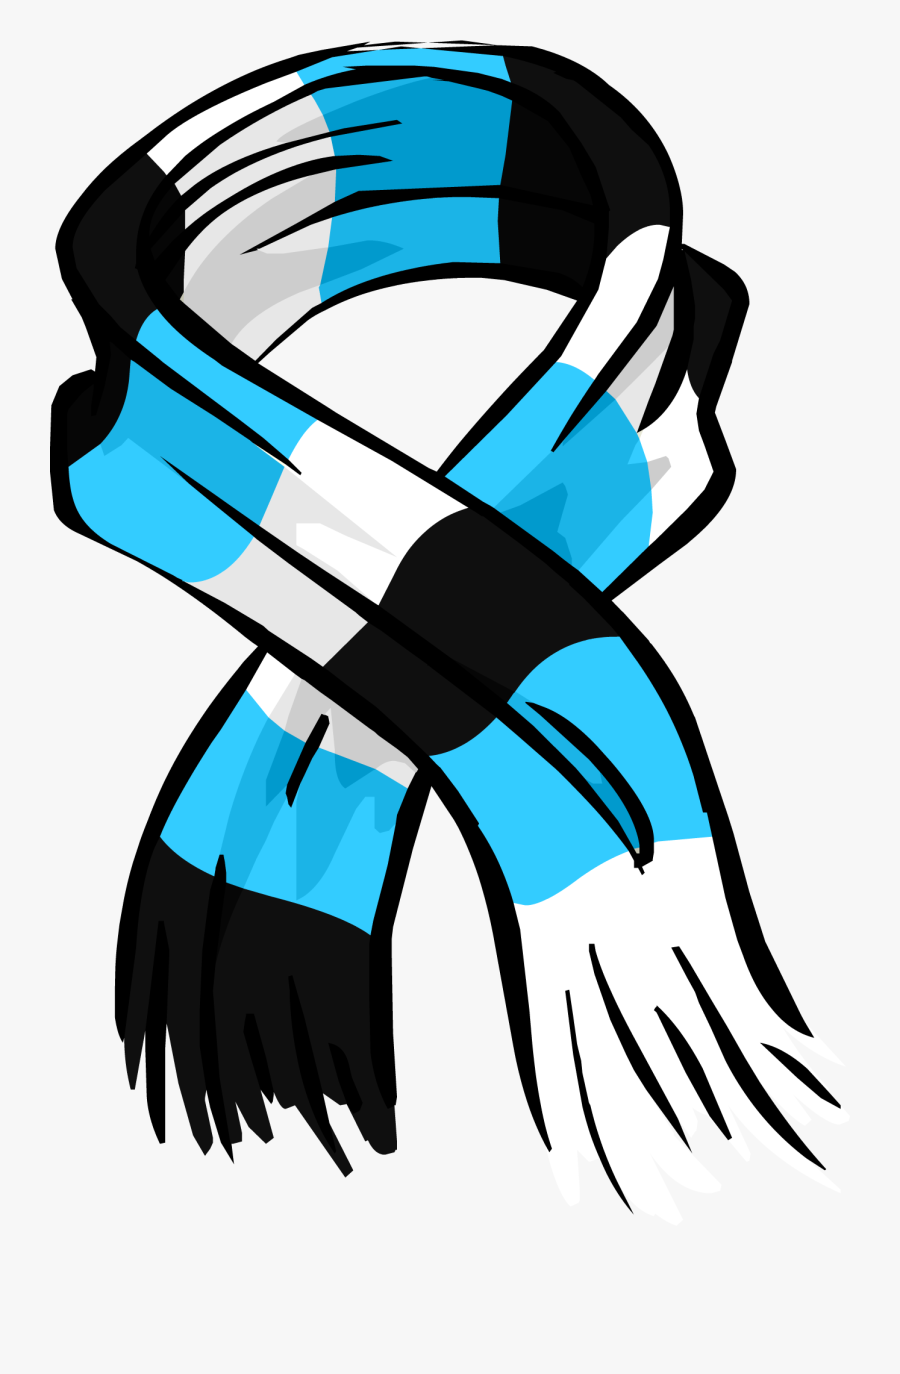 Blue Striped Scarf Png Image - Club Penguin Scarf, Transparent Clipart